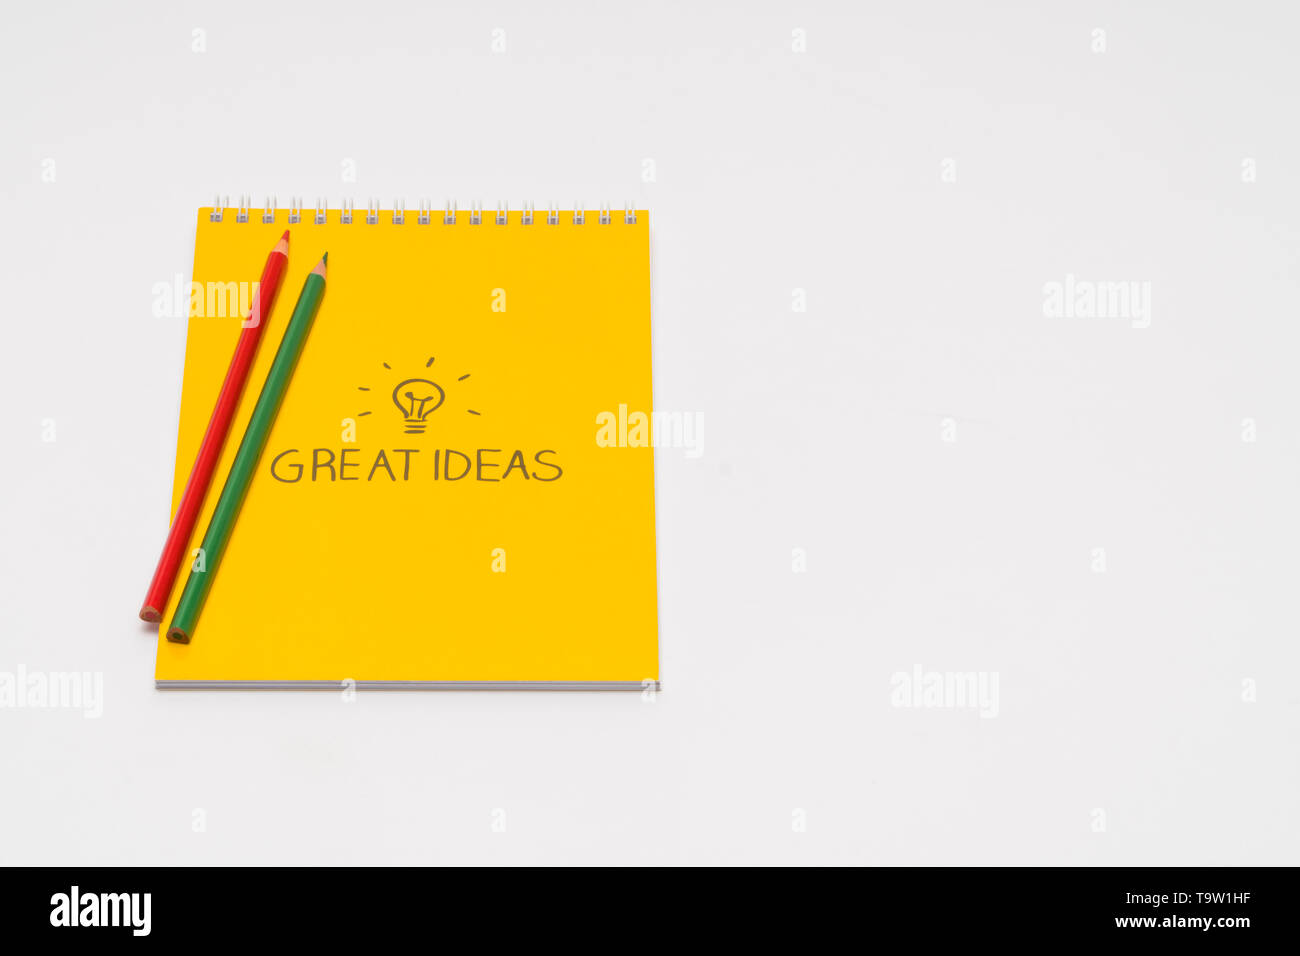 yellow notepad with colored pencils on white background, isolated. back to school. great ideas Stock Photo